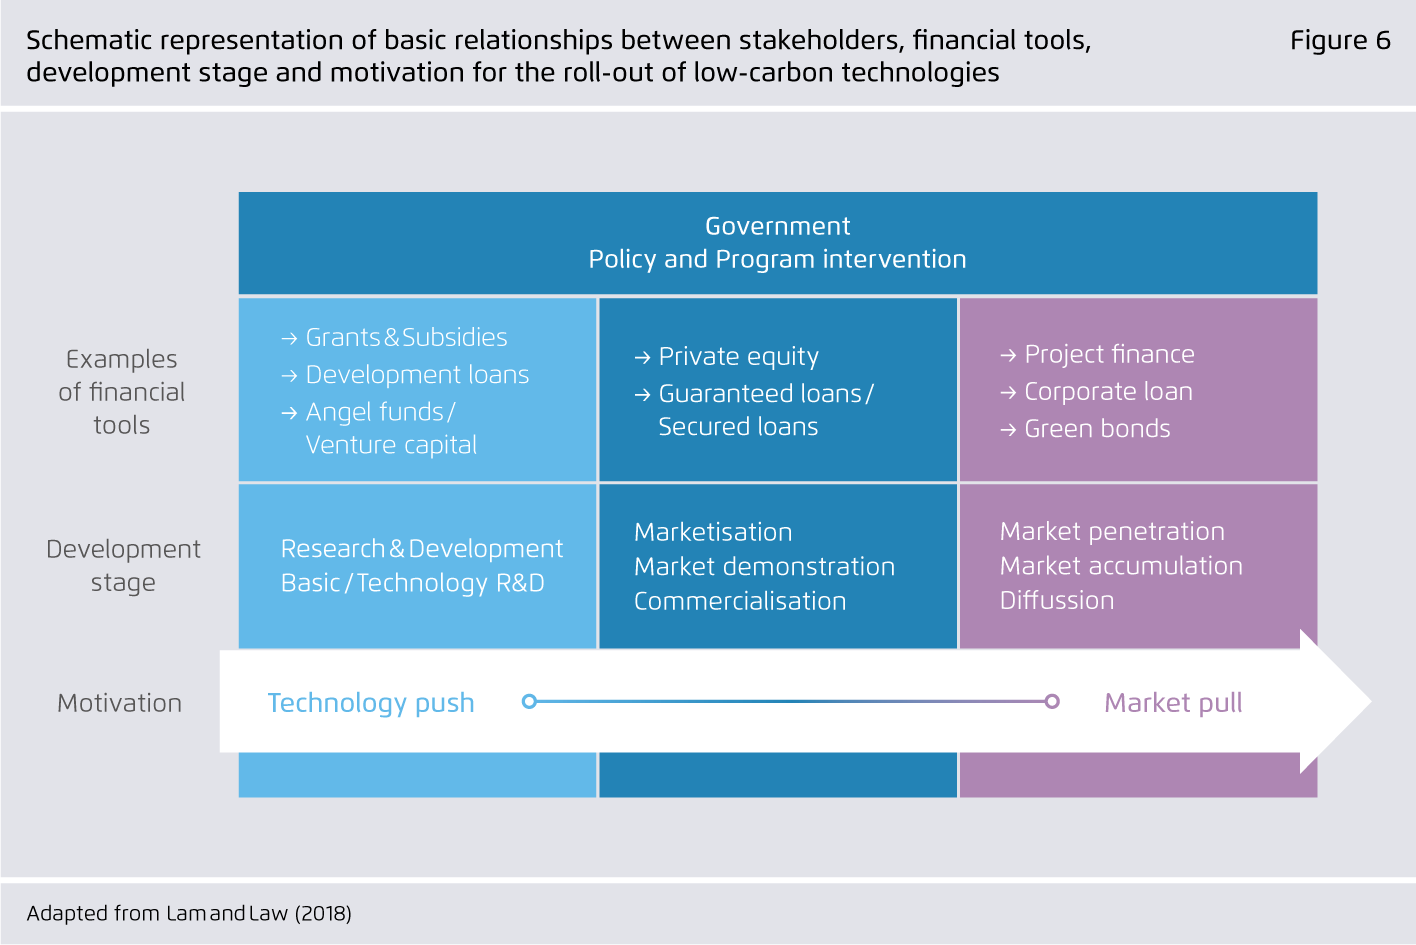 Preview for Schematic representation of basic relationships between stakeholders, financial tools, development stage and motivation for the roll-out of low-carbon technologies